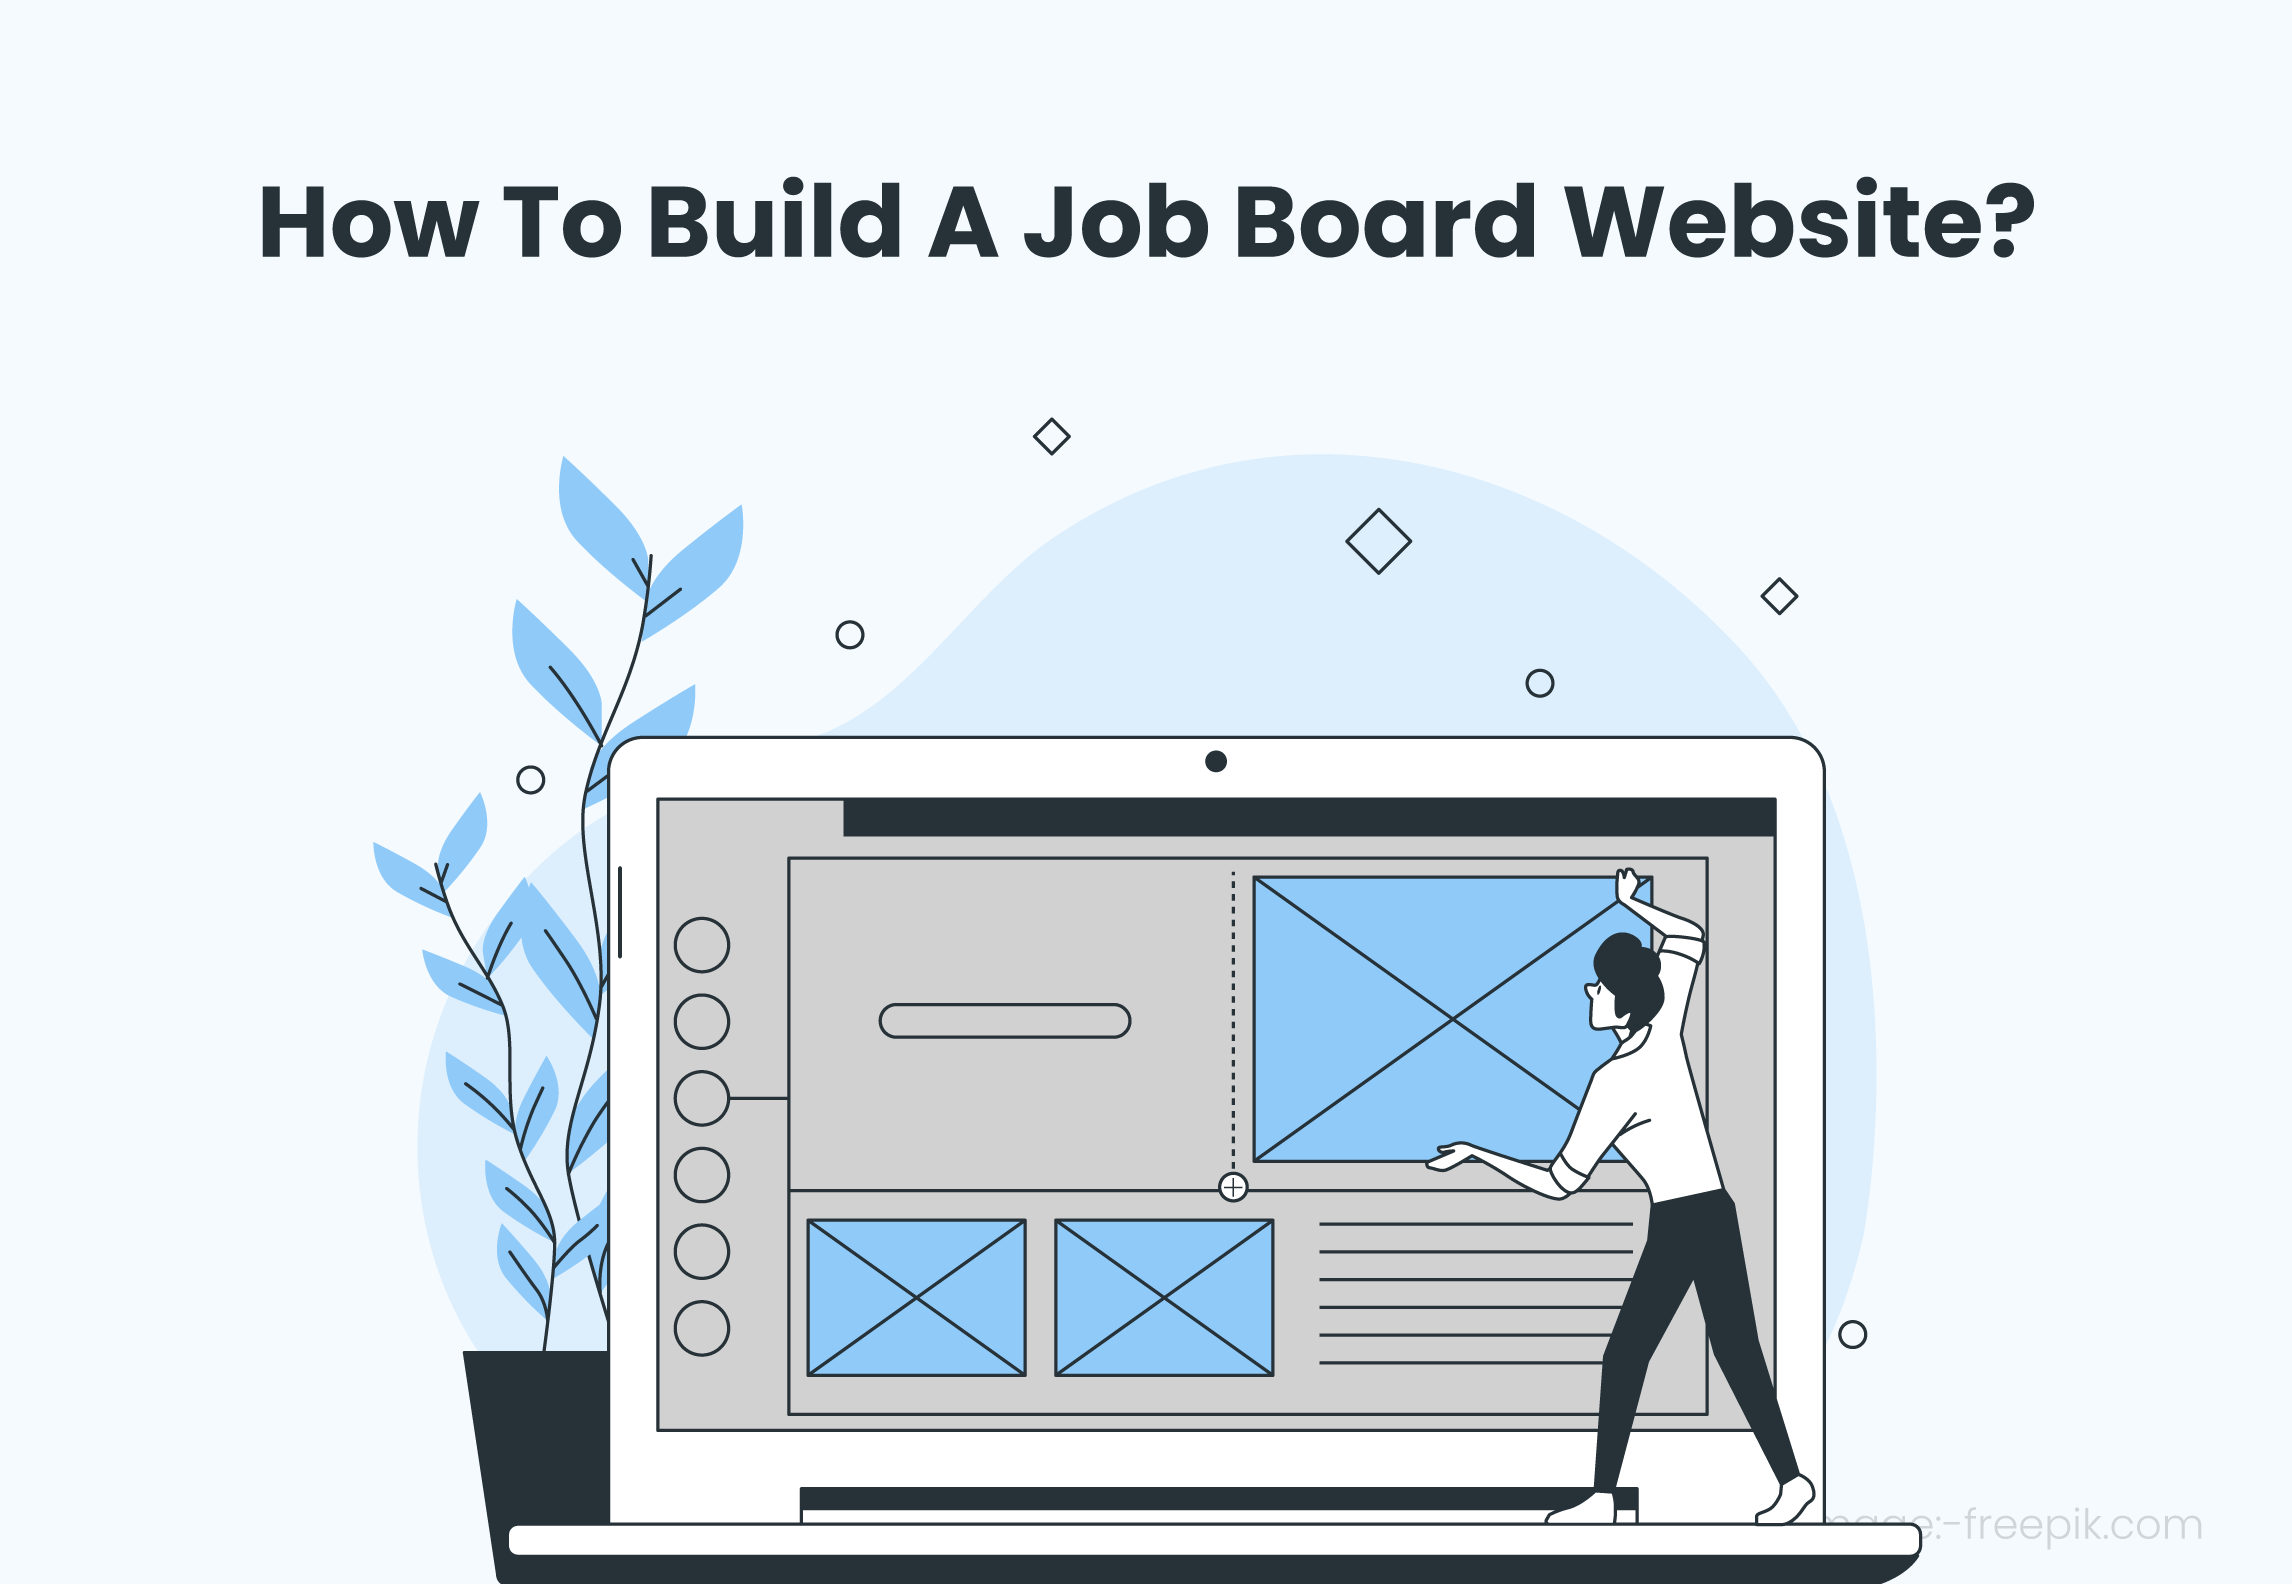 How To Create A Job Board Website In 5 Steps?